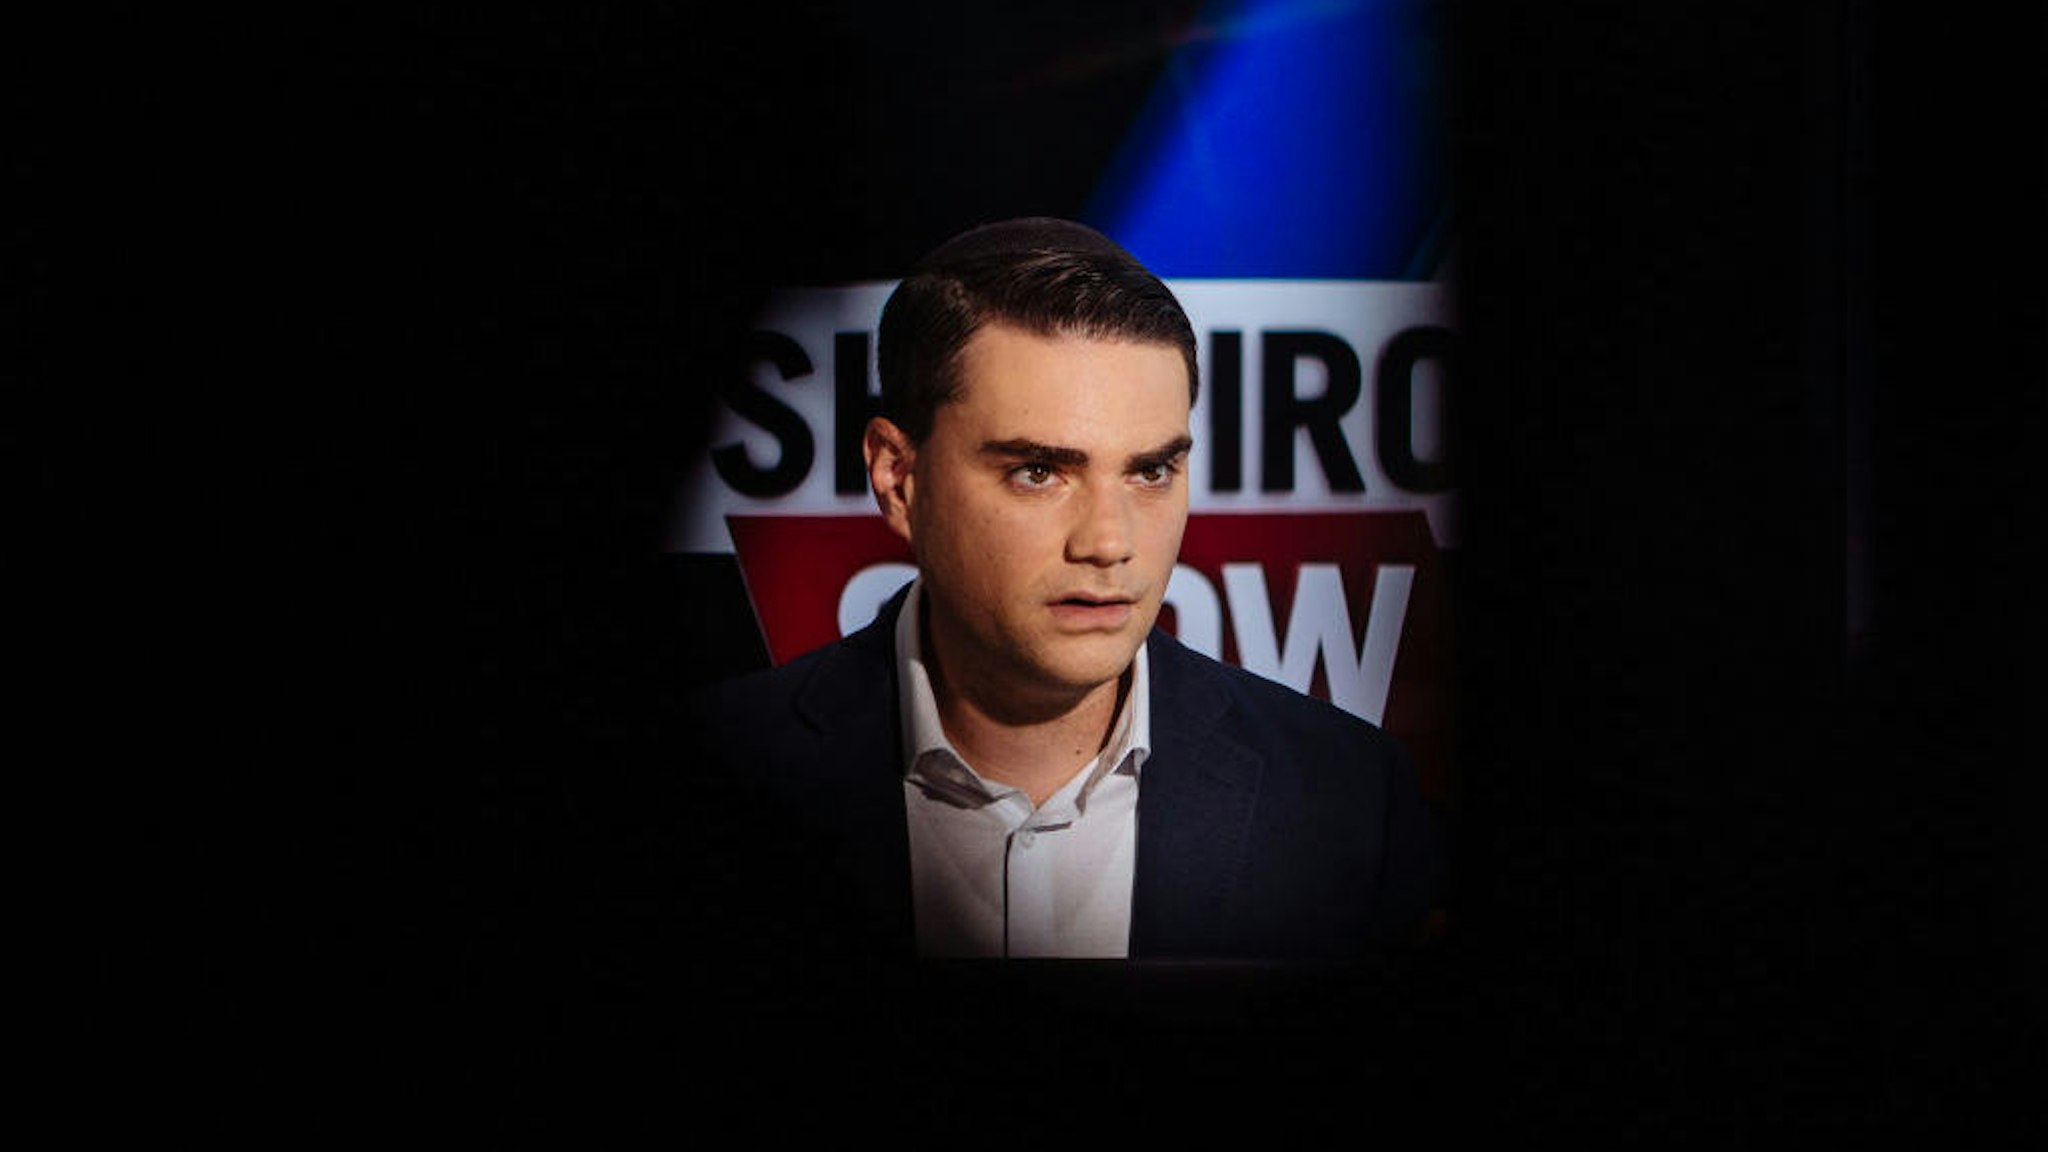 LOS ANGELES, CA SEPTEMBER 26: Conservative political commentator, writer, and lawyer Ben Shapiro during a break of the filming of his show The Ben Shapiro Show on September 26, 2018 in Los Angles, CA (Photo by Jessica Pons/ For The Washington Post via Getty Images)